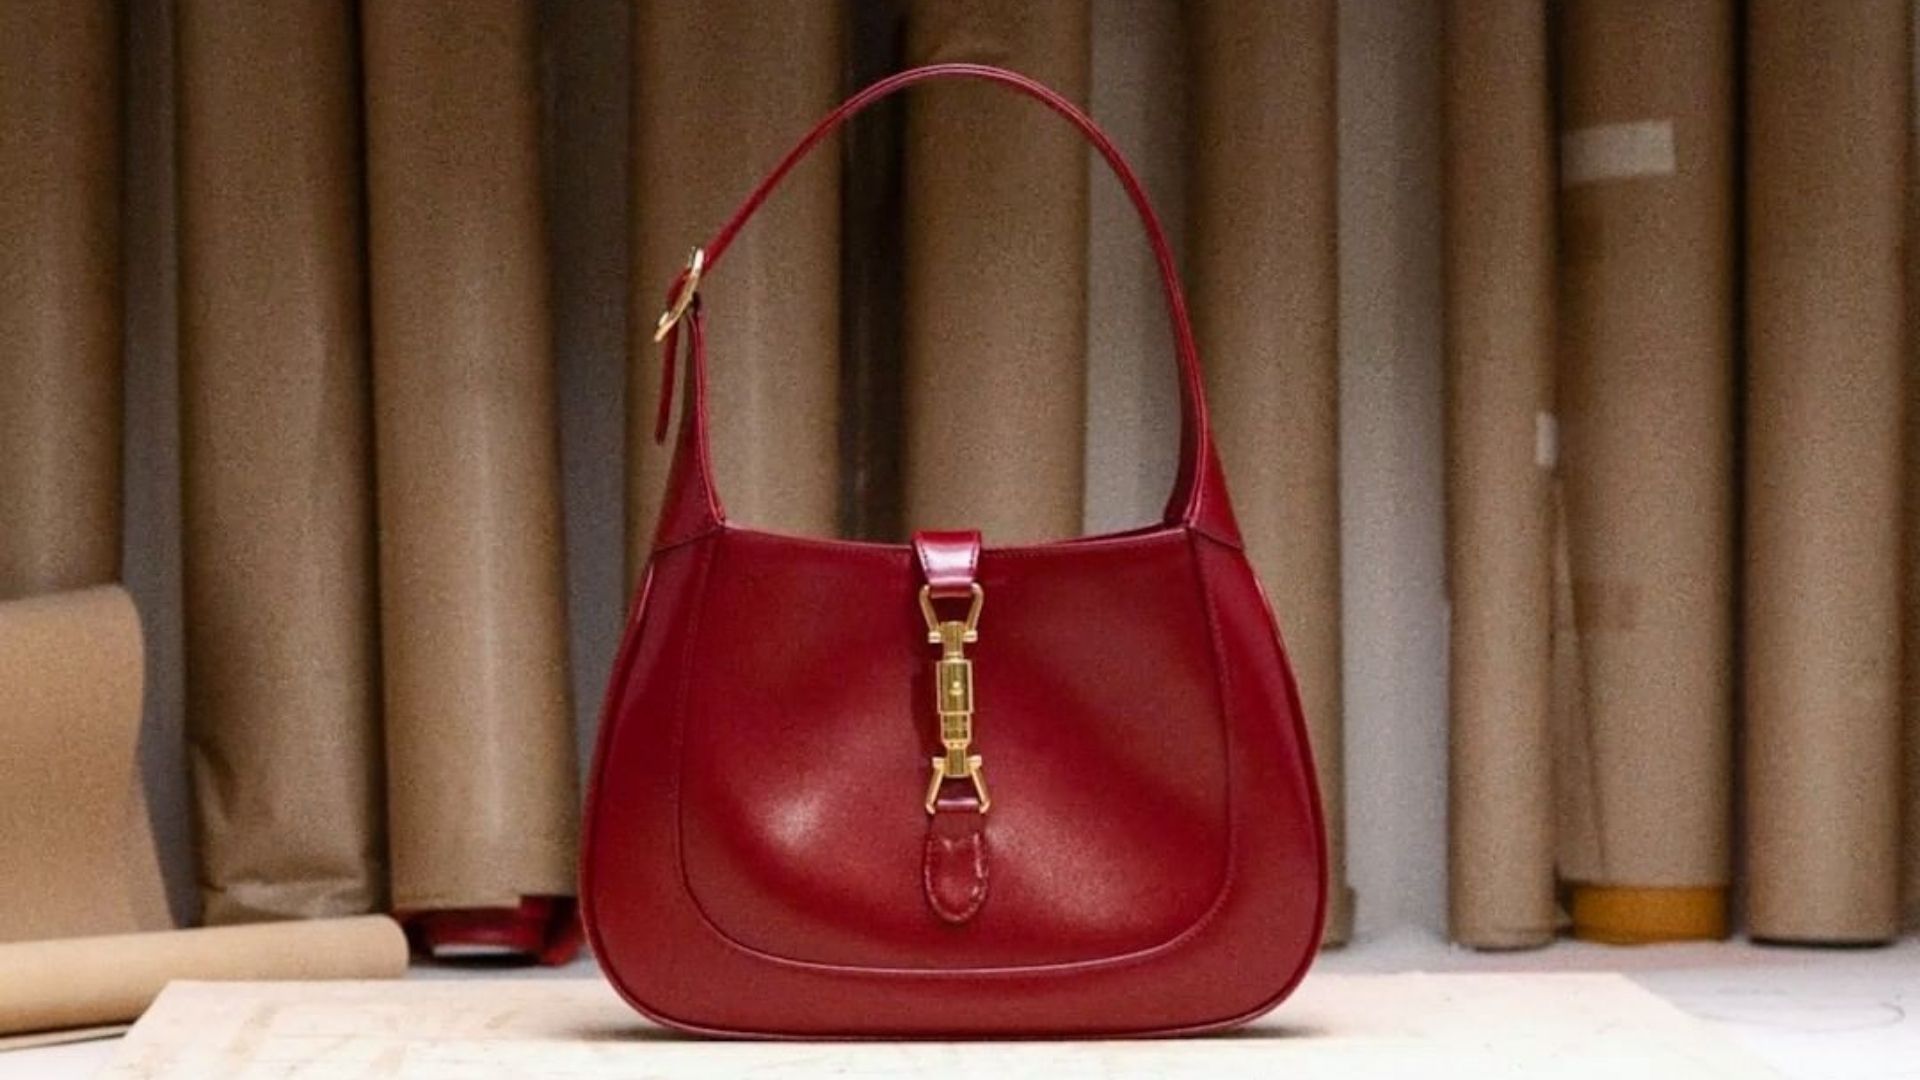 Gucci reintroduces its iconic bag, 'The Jackie